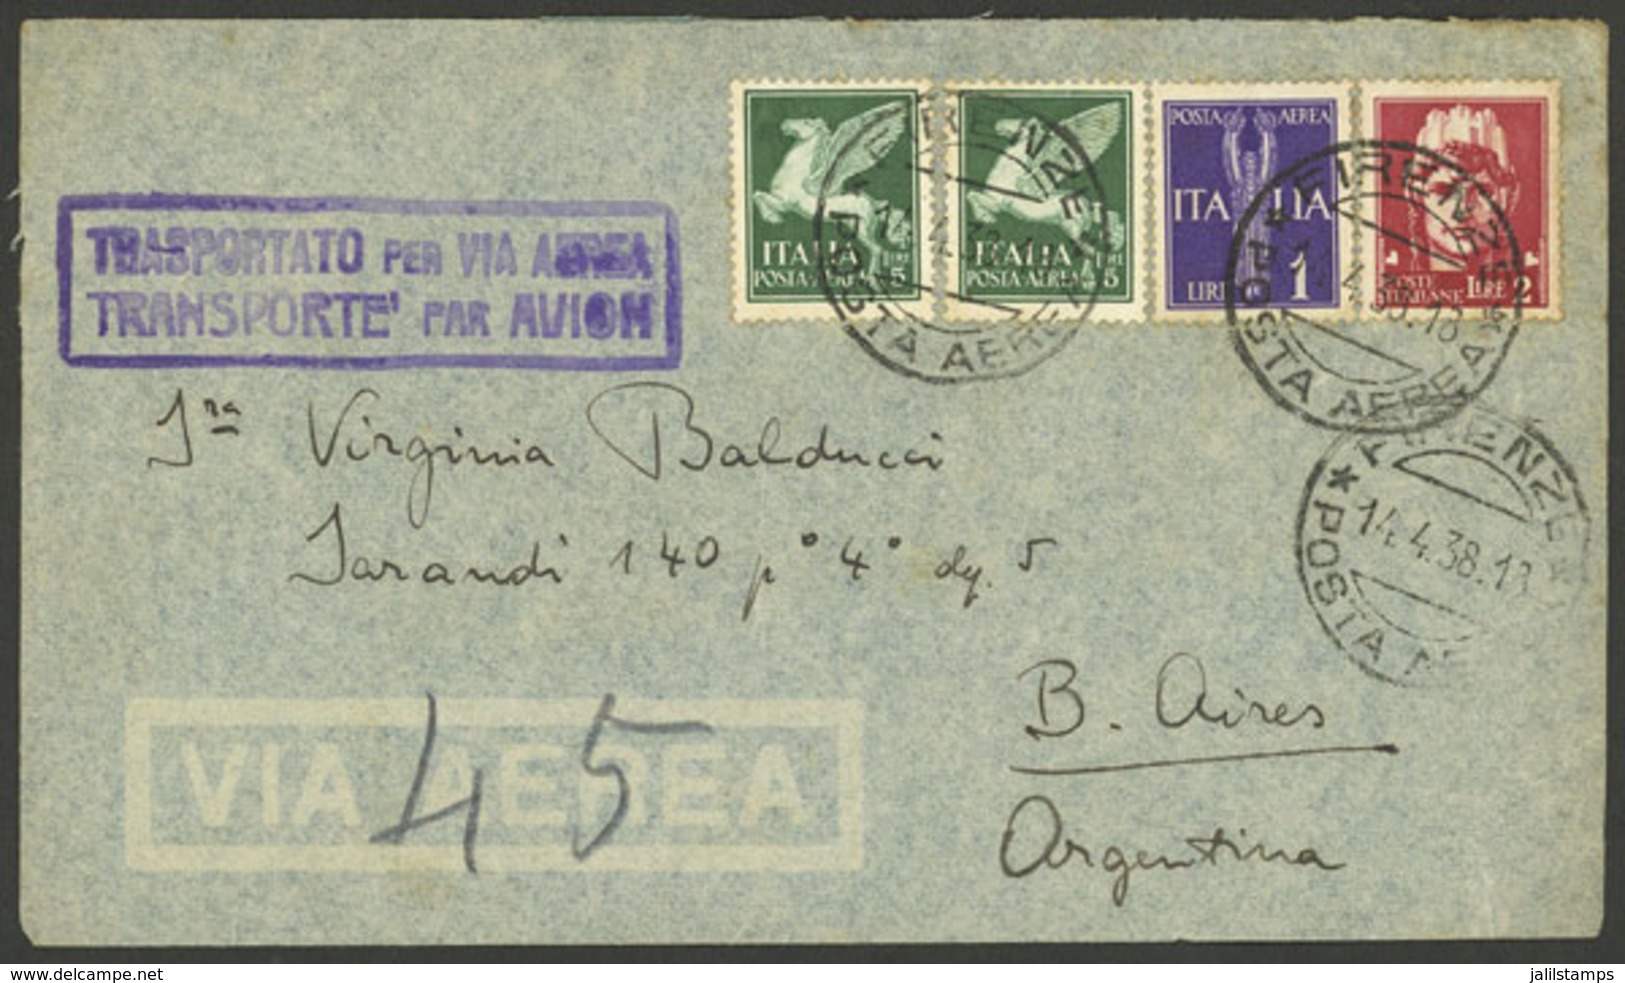 ITALY: 14/AP/1938 Firenze - Argentina, Airmail Cover Franked With 13L., Very Nice! - Sin Clasificación